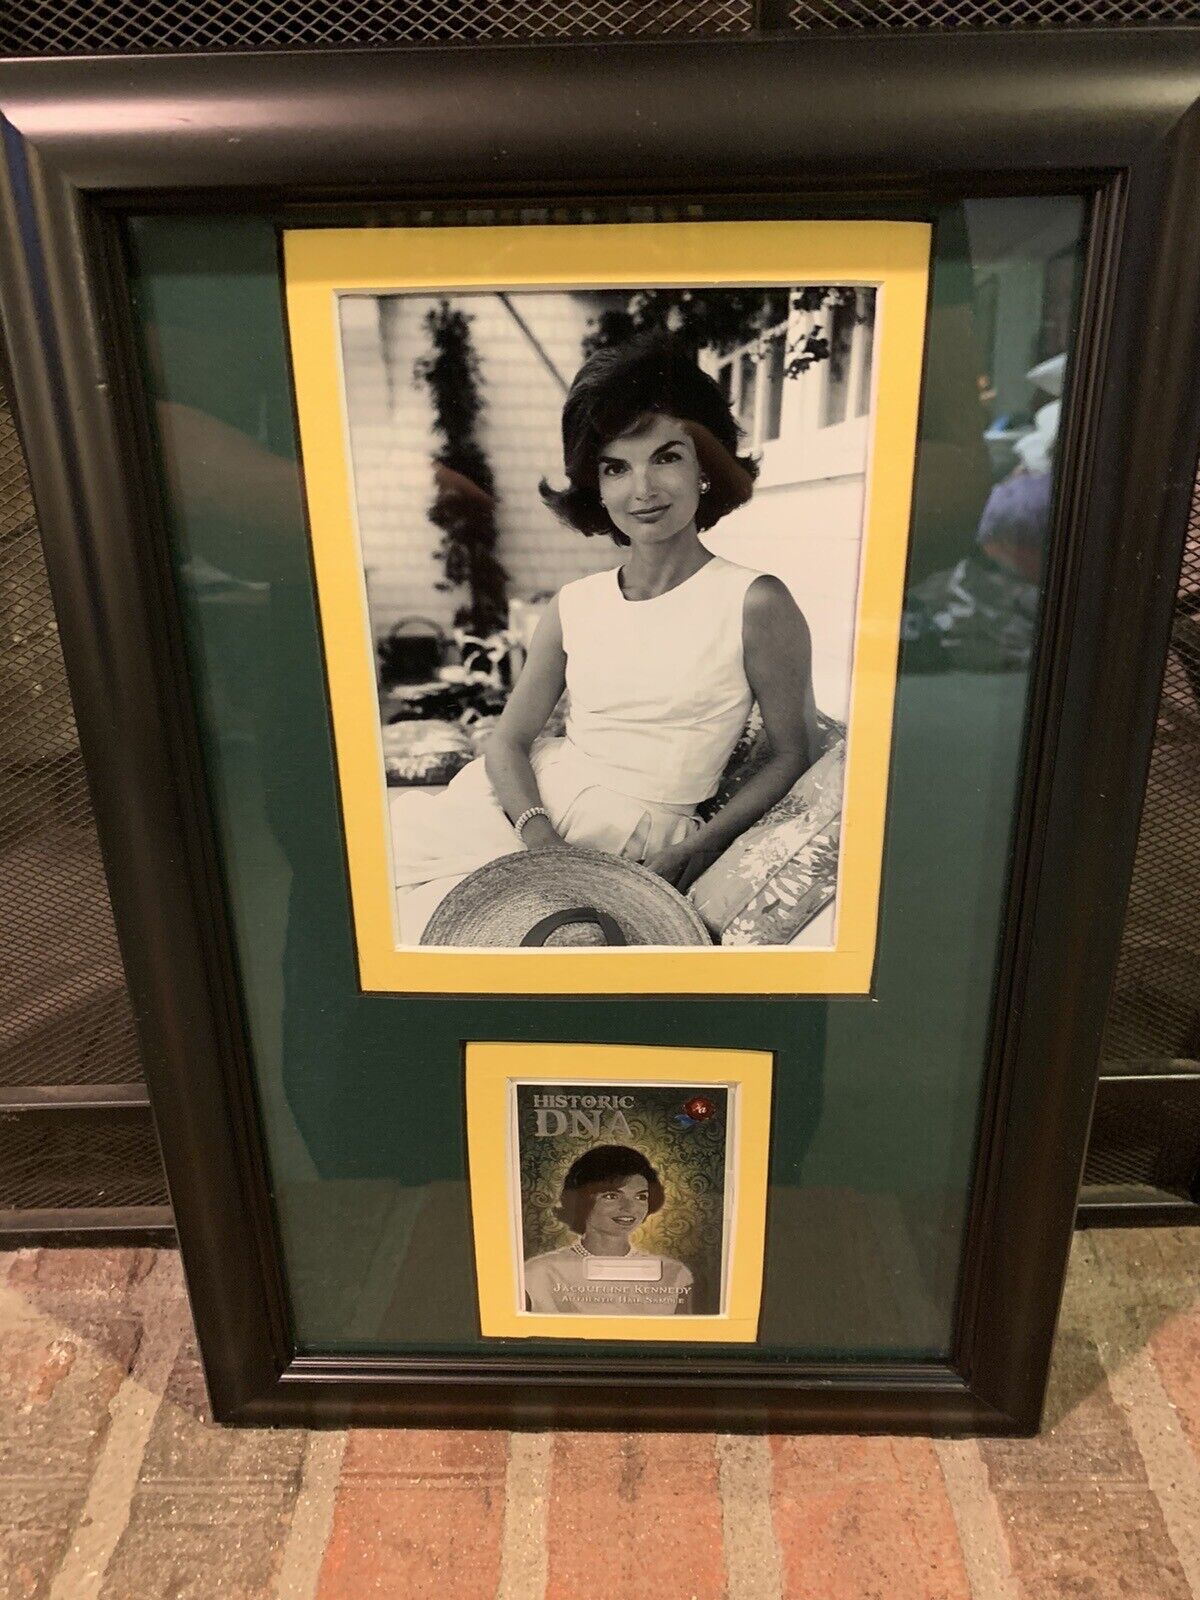 Framed Jacqueline “Jackie” Kennedy Historic DNA Hair Sample Card And Photograph